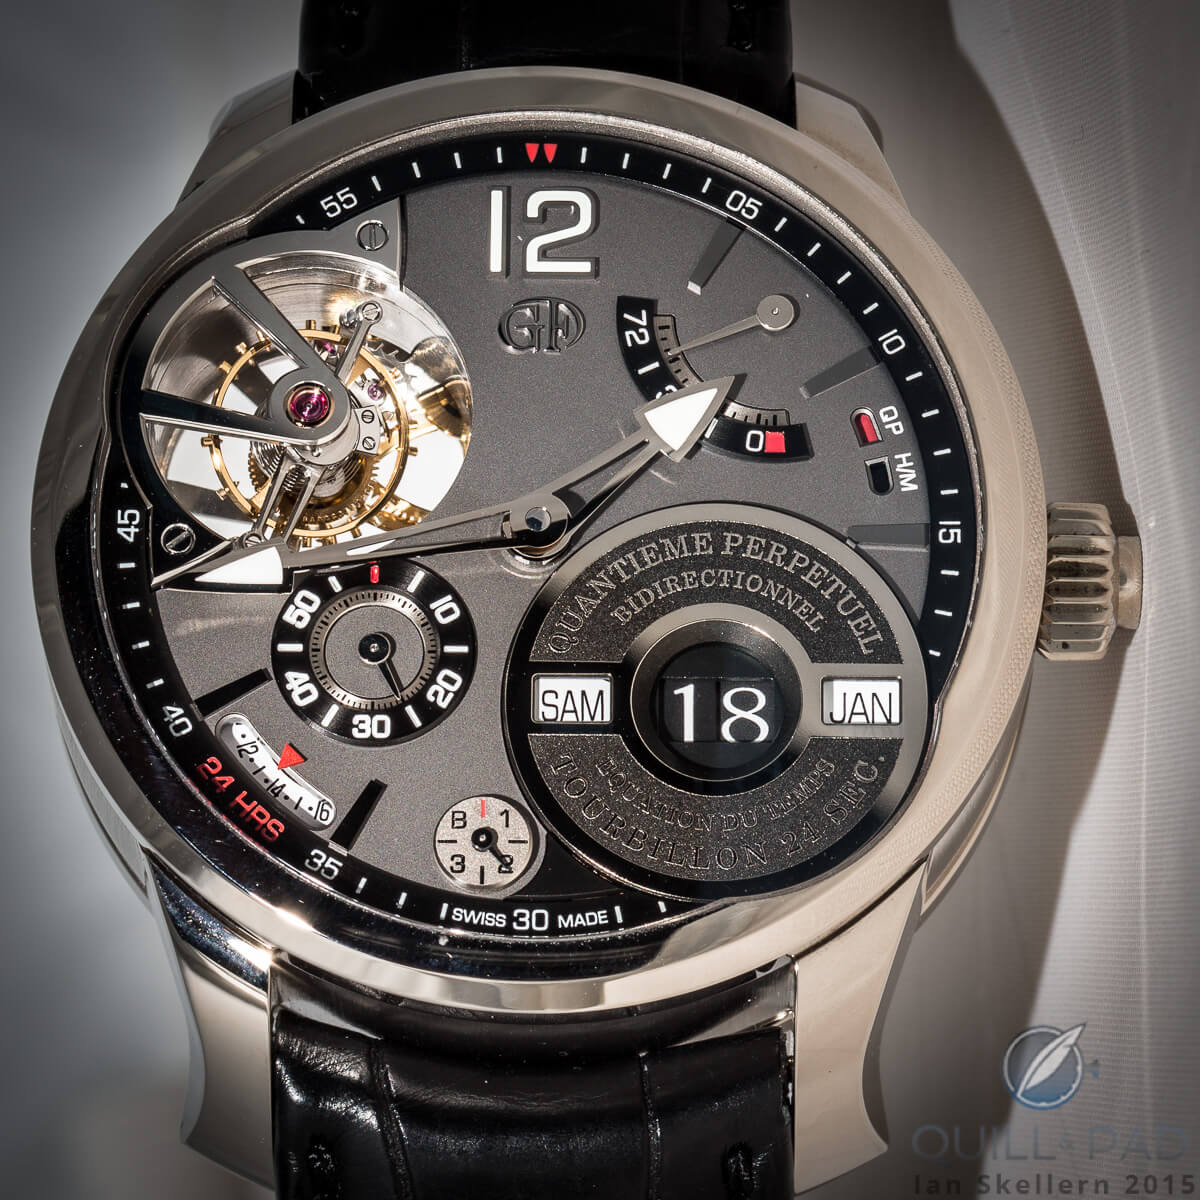 Greubel Forsey Quantième Perpétuel à Équation. Note the ease of reading day, (big) date and month in a straight line